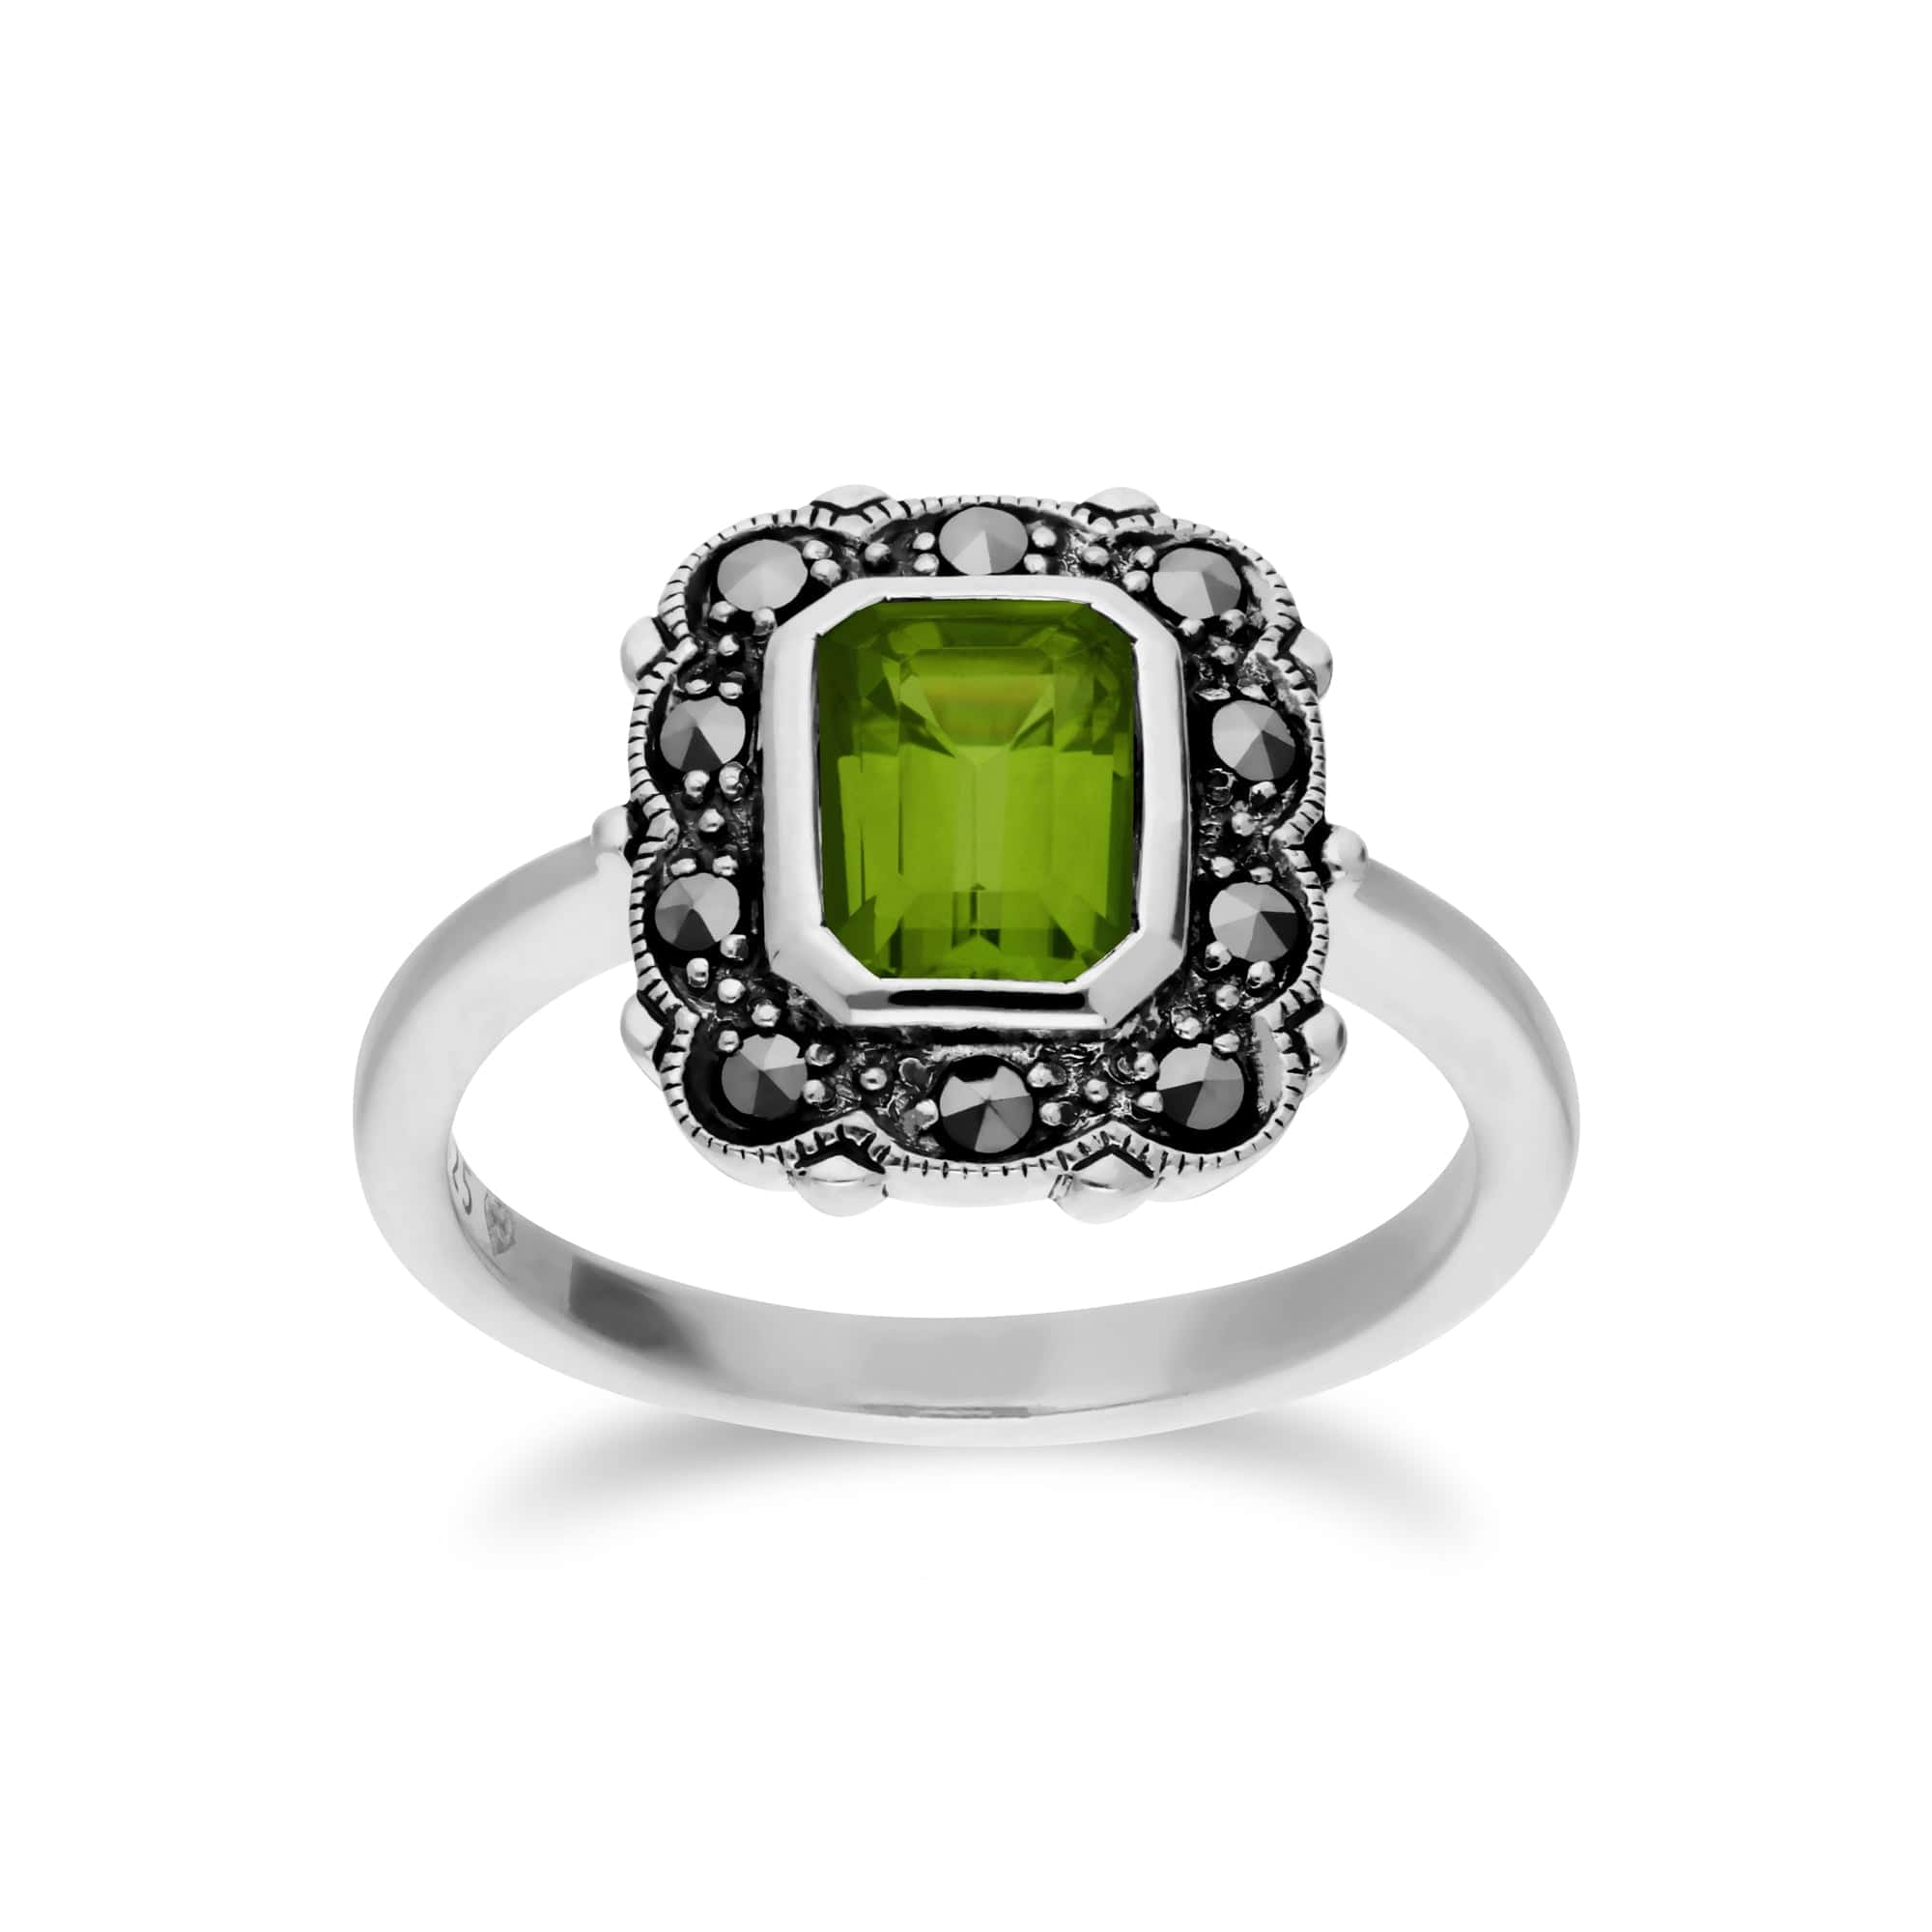 214R597106925 Art Nouveau Style Octagon Peridot & Marcasite Border Ring in 925 Sterling Silver 1